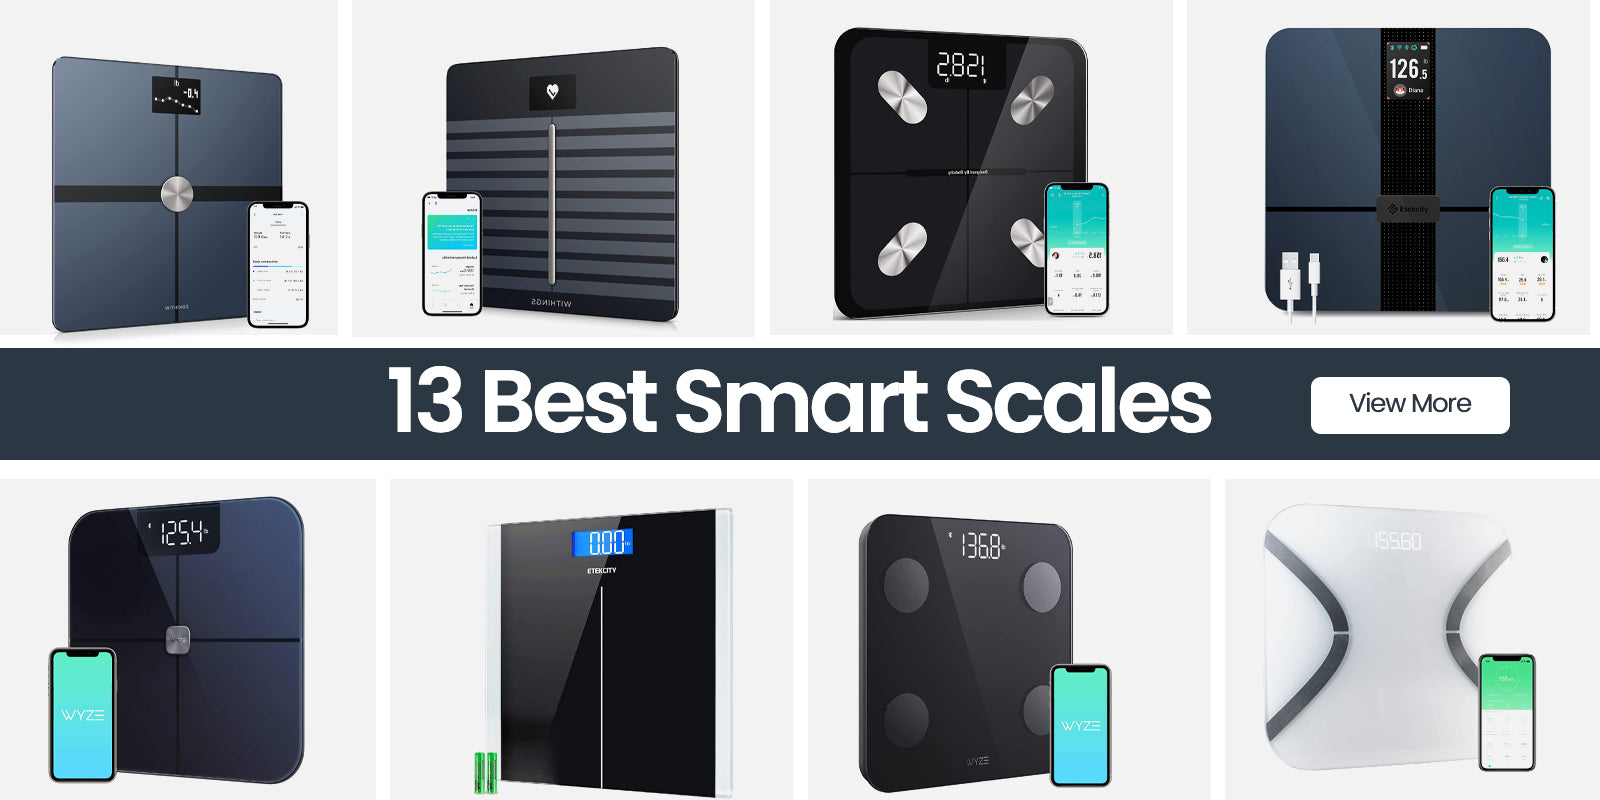 Arboleaf Digital Scale, Bluetooth Smart Scale Scales for Body Weight